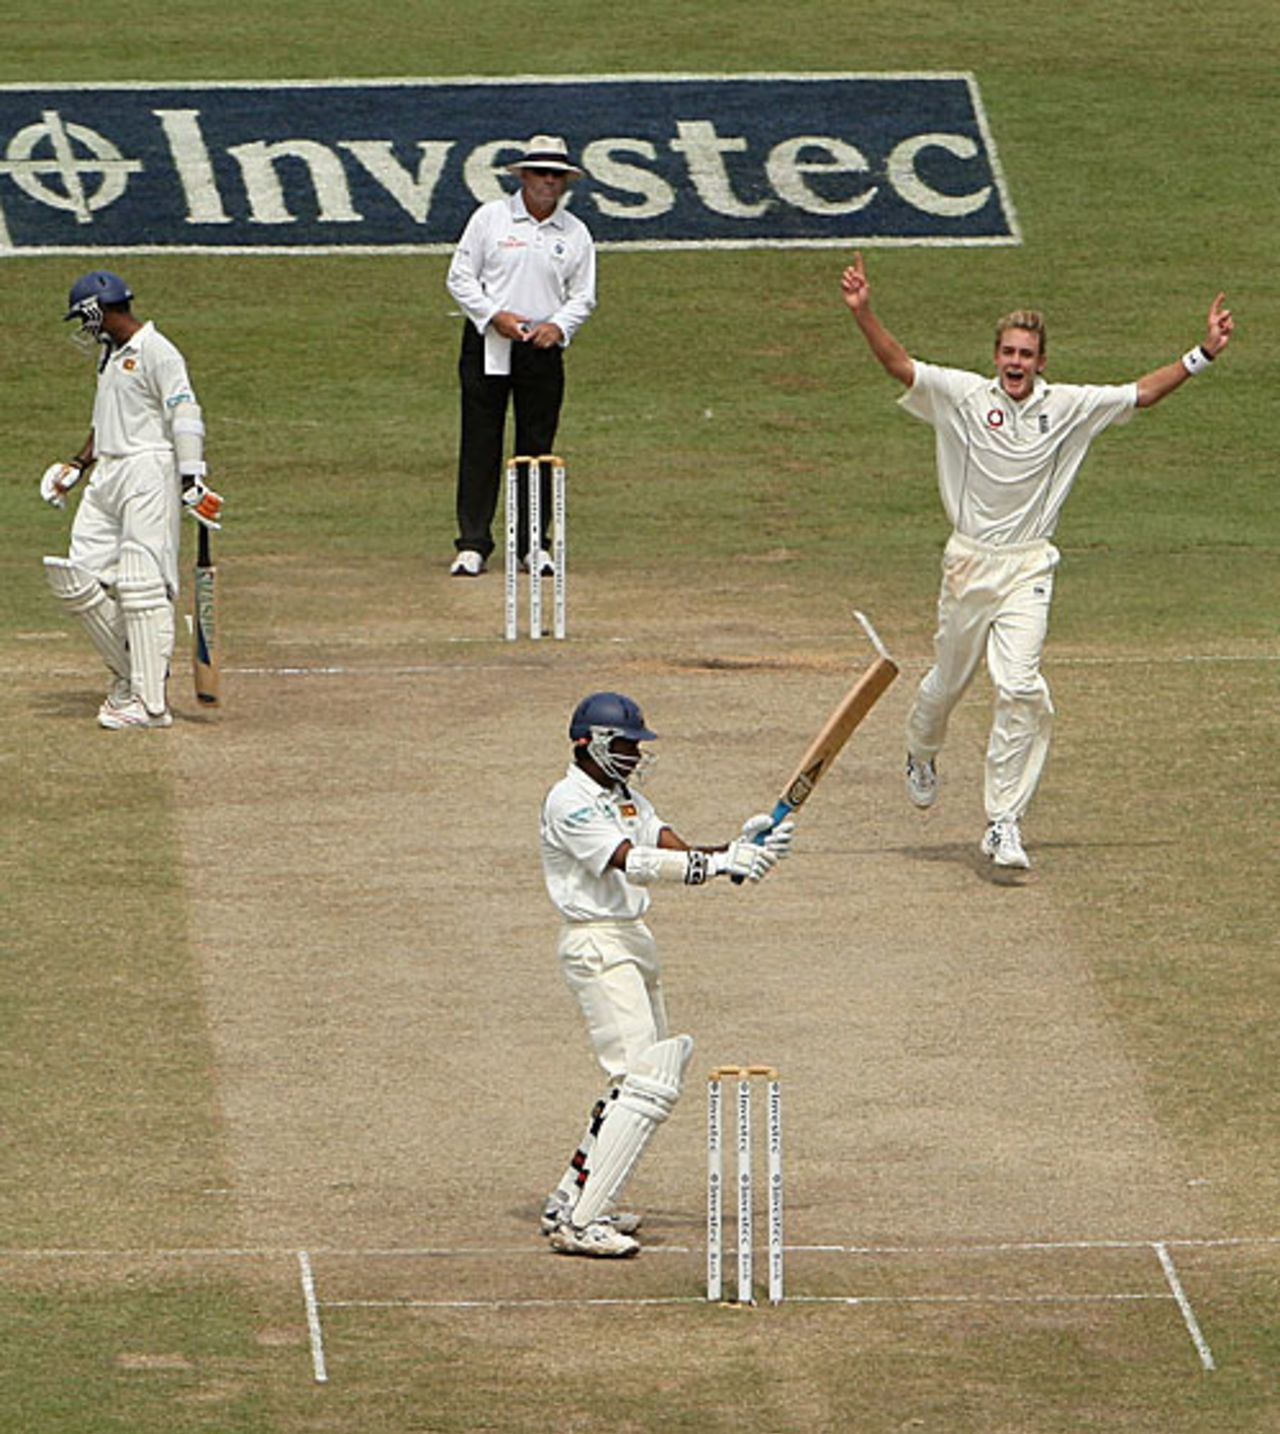 Stuart Broad runs down the pitch to celebrate the wicket of Chaminda Vaas, his first in Tests, Sri Lanka v England, 2nd Test, Colombo, December 12, 2007